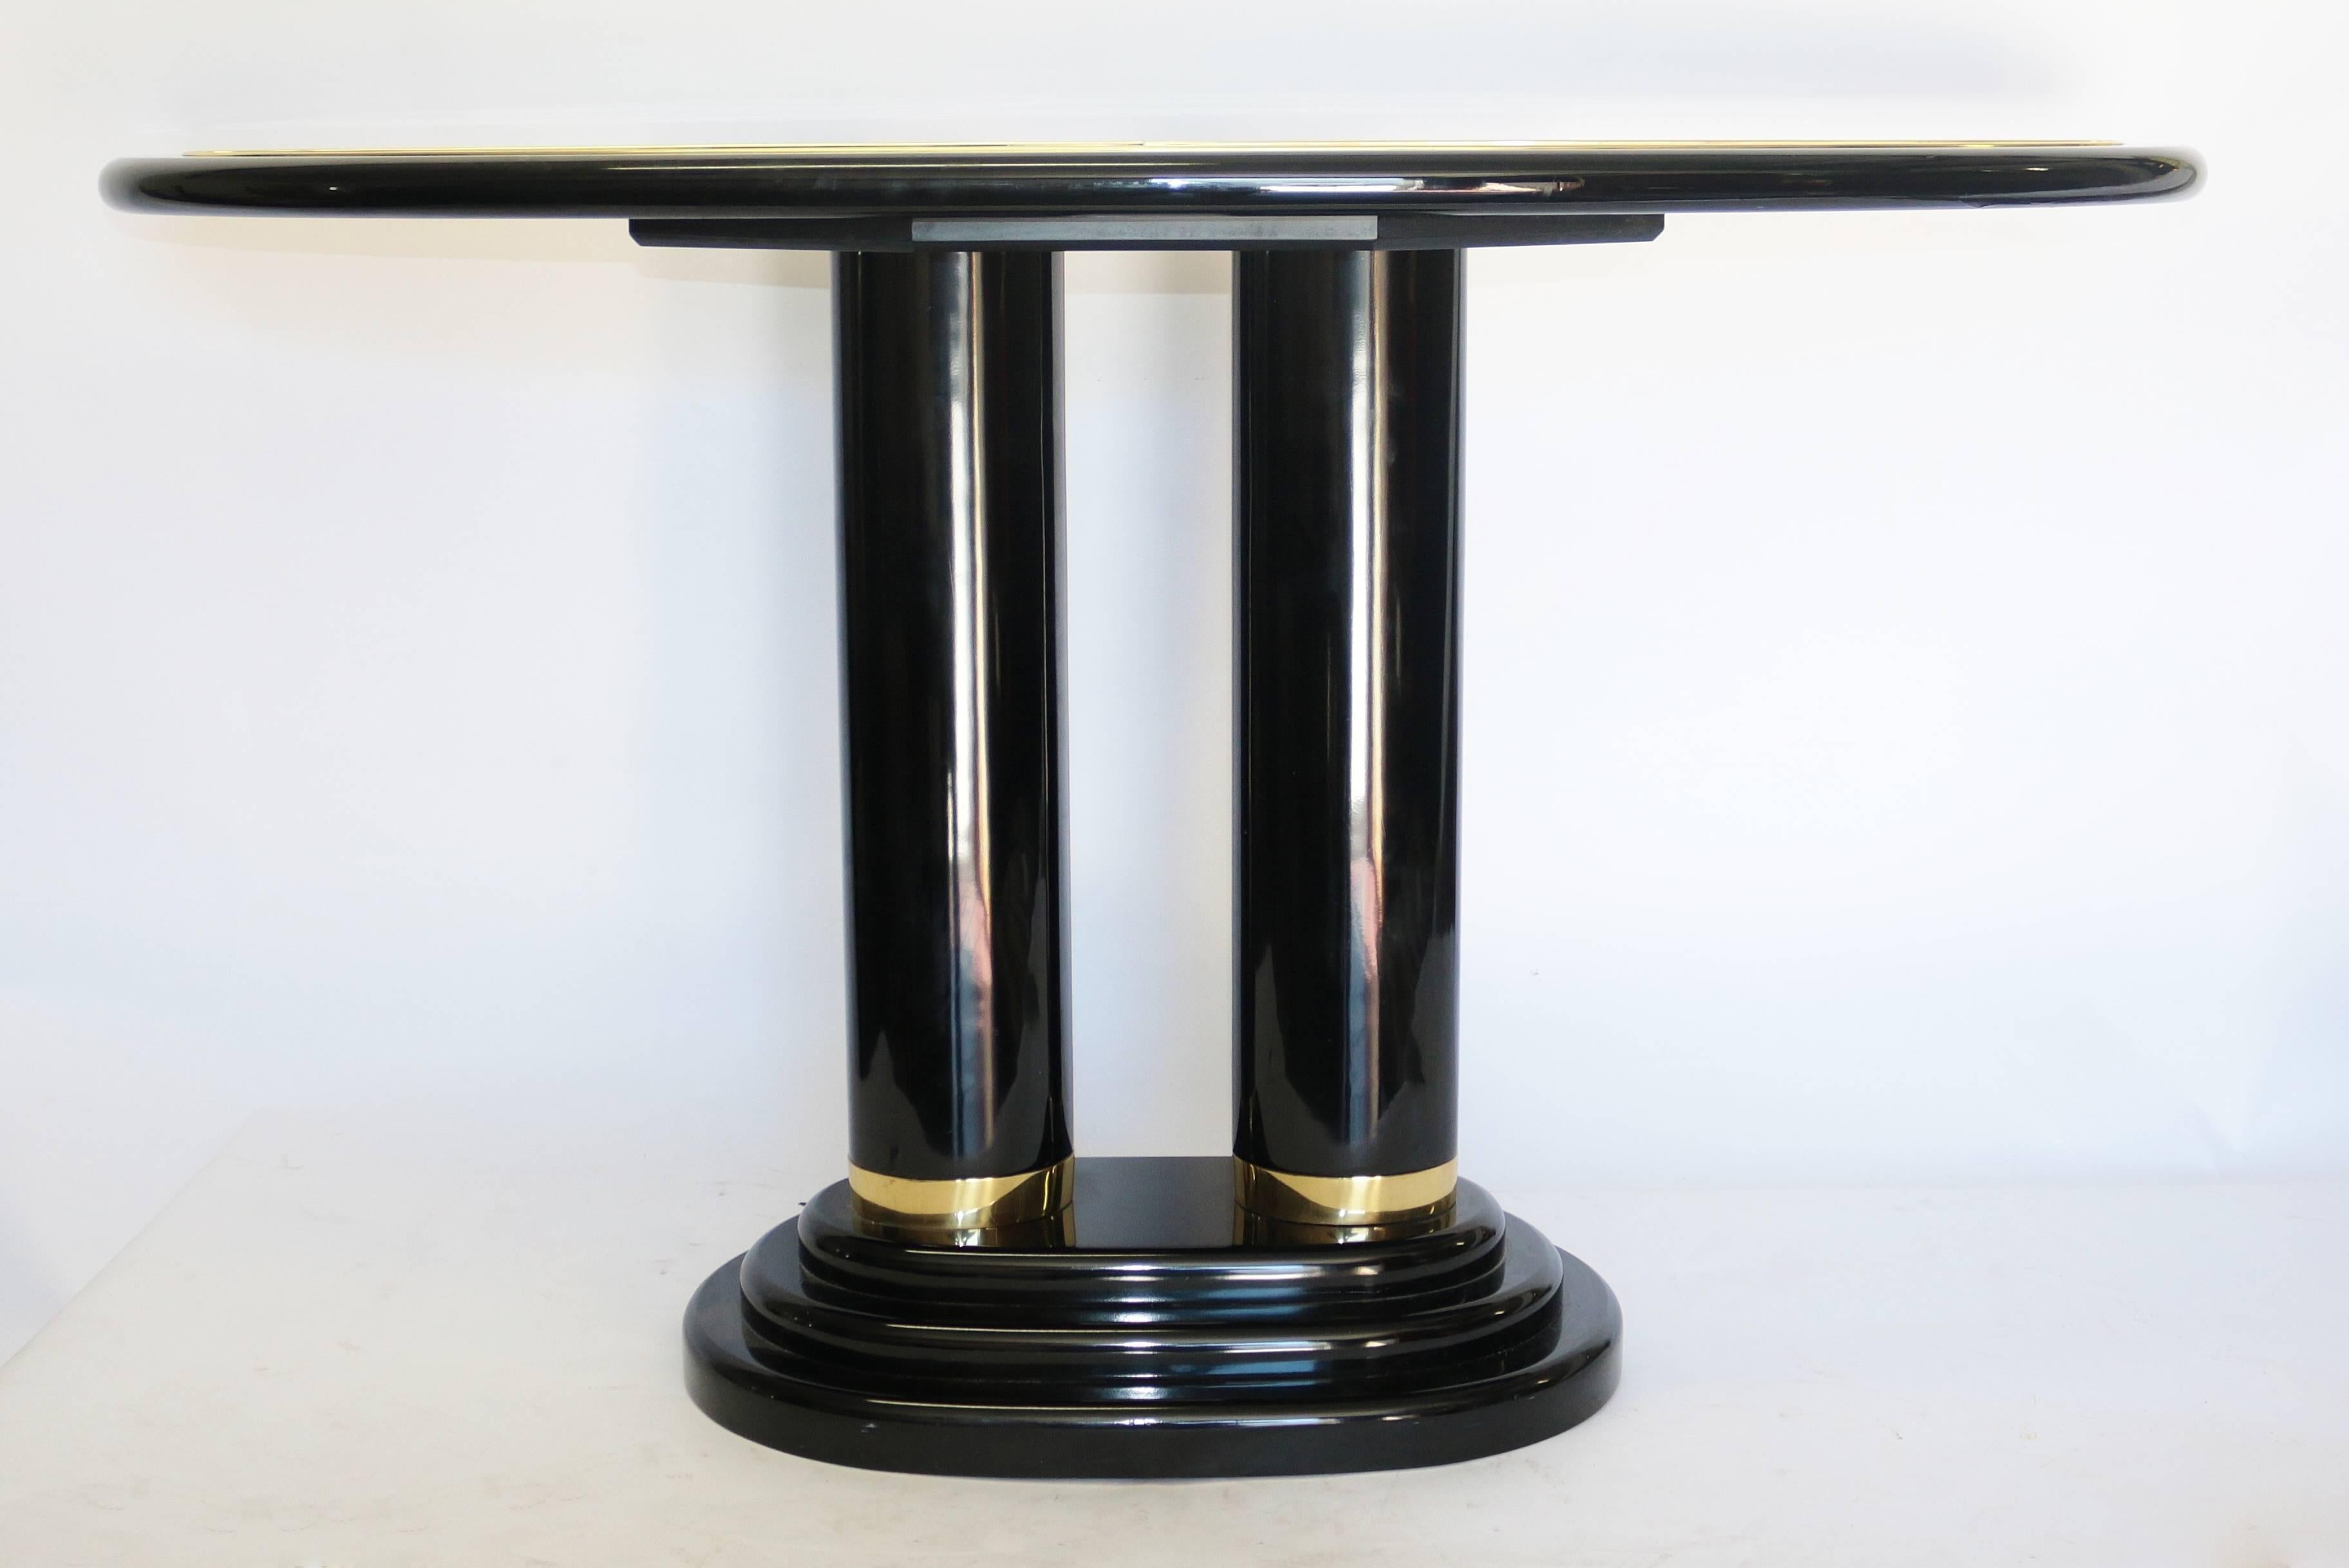 This elegant lacquer console table with a great modern feel. This tall pedestal console table has a beautiful thick brass trim and has black lacquer with brown lacquered top. This great modern pedestal console table has an elegant form factor with a